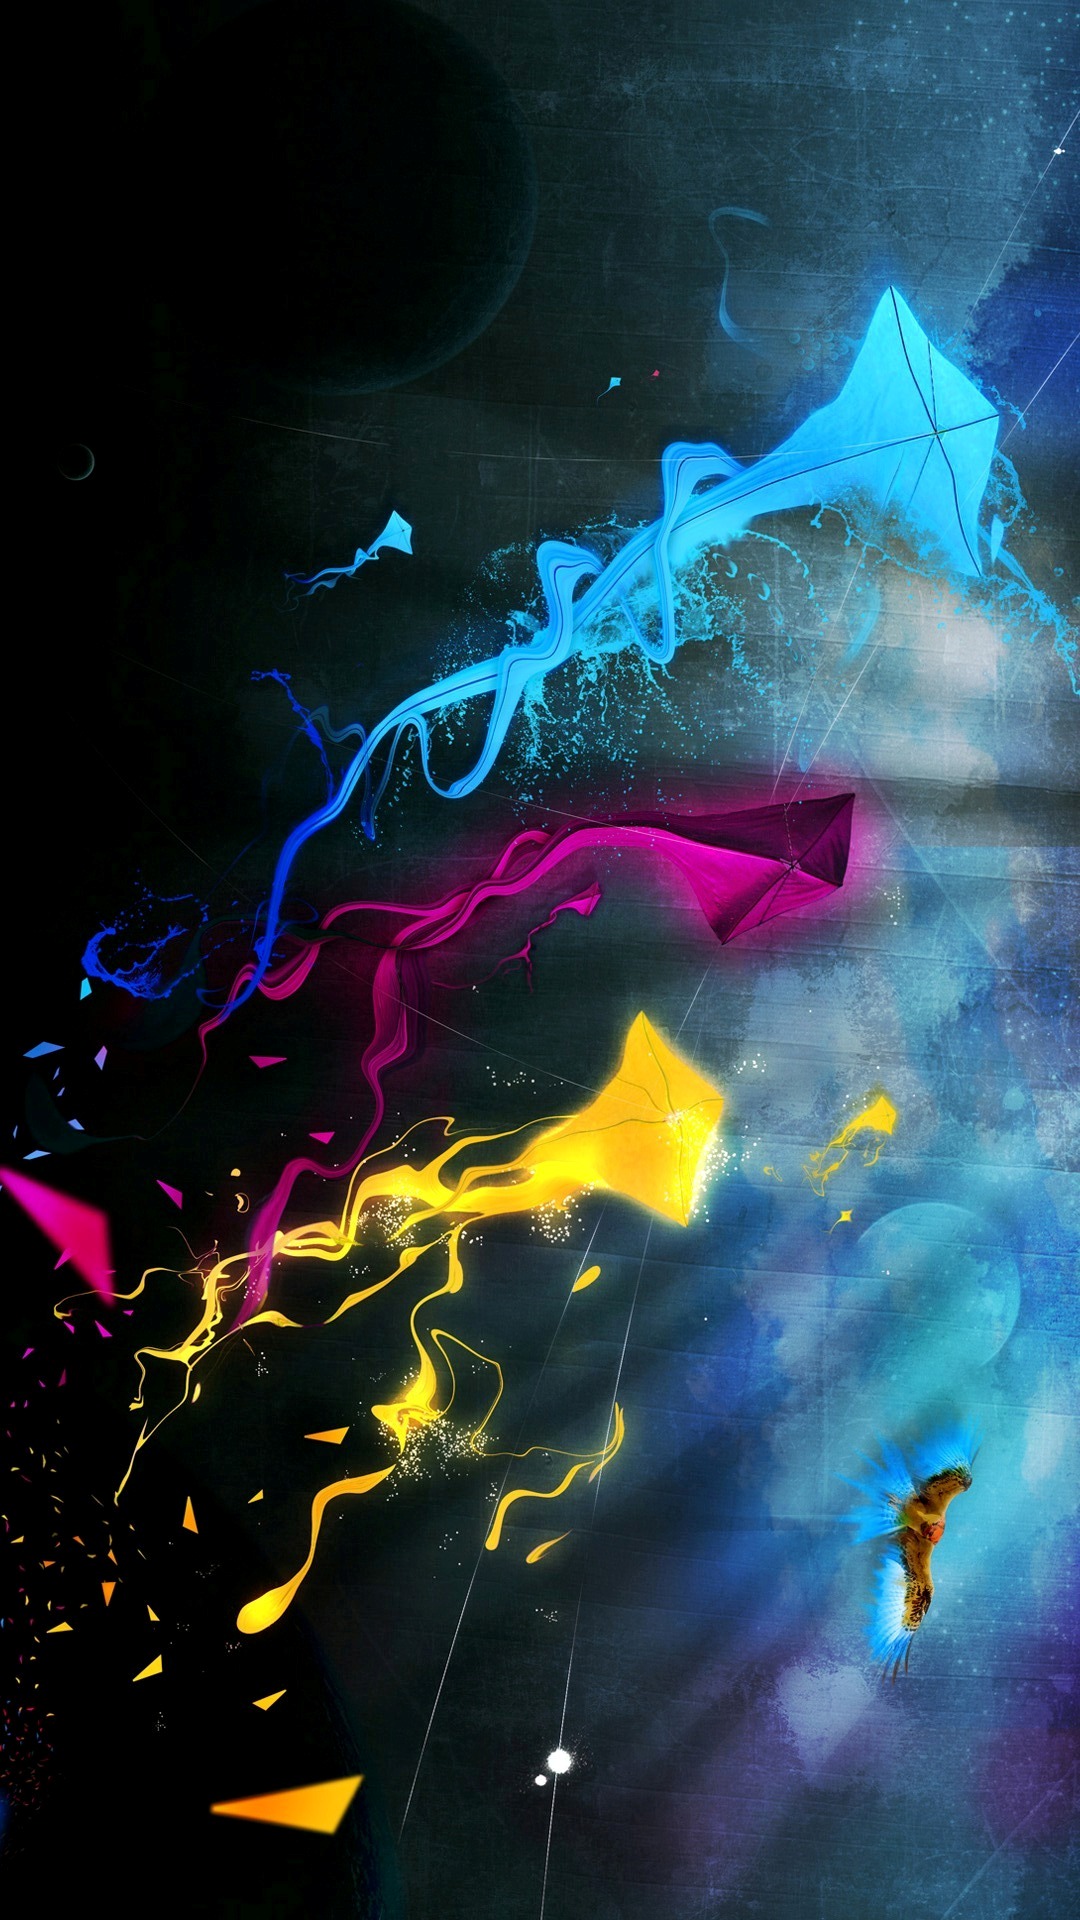 HD Wallpaper For Mobile 3d 4k Quality